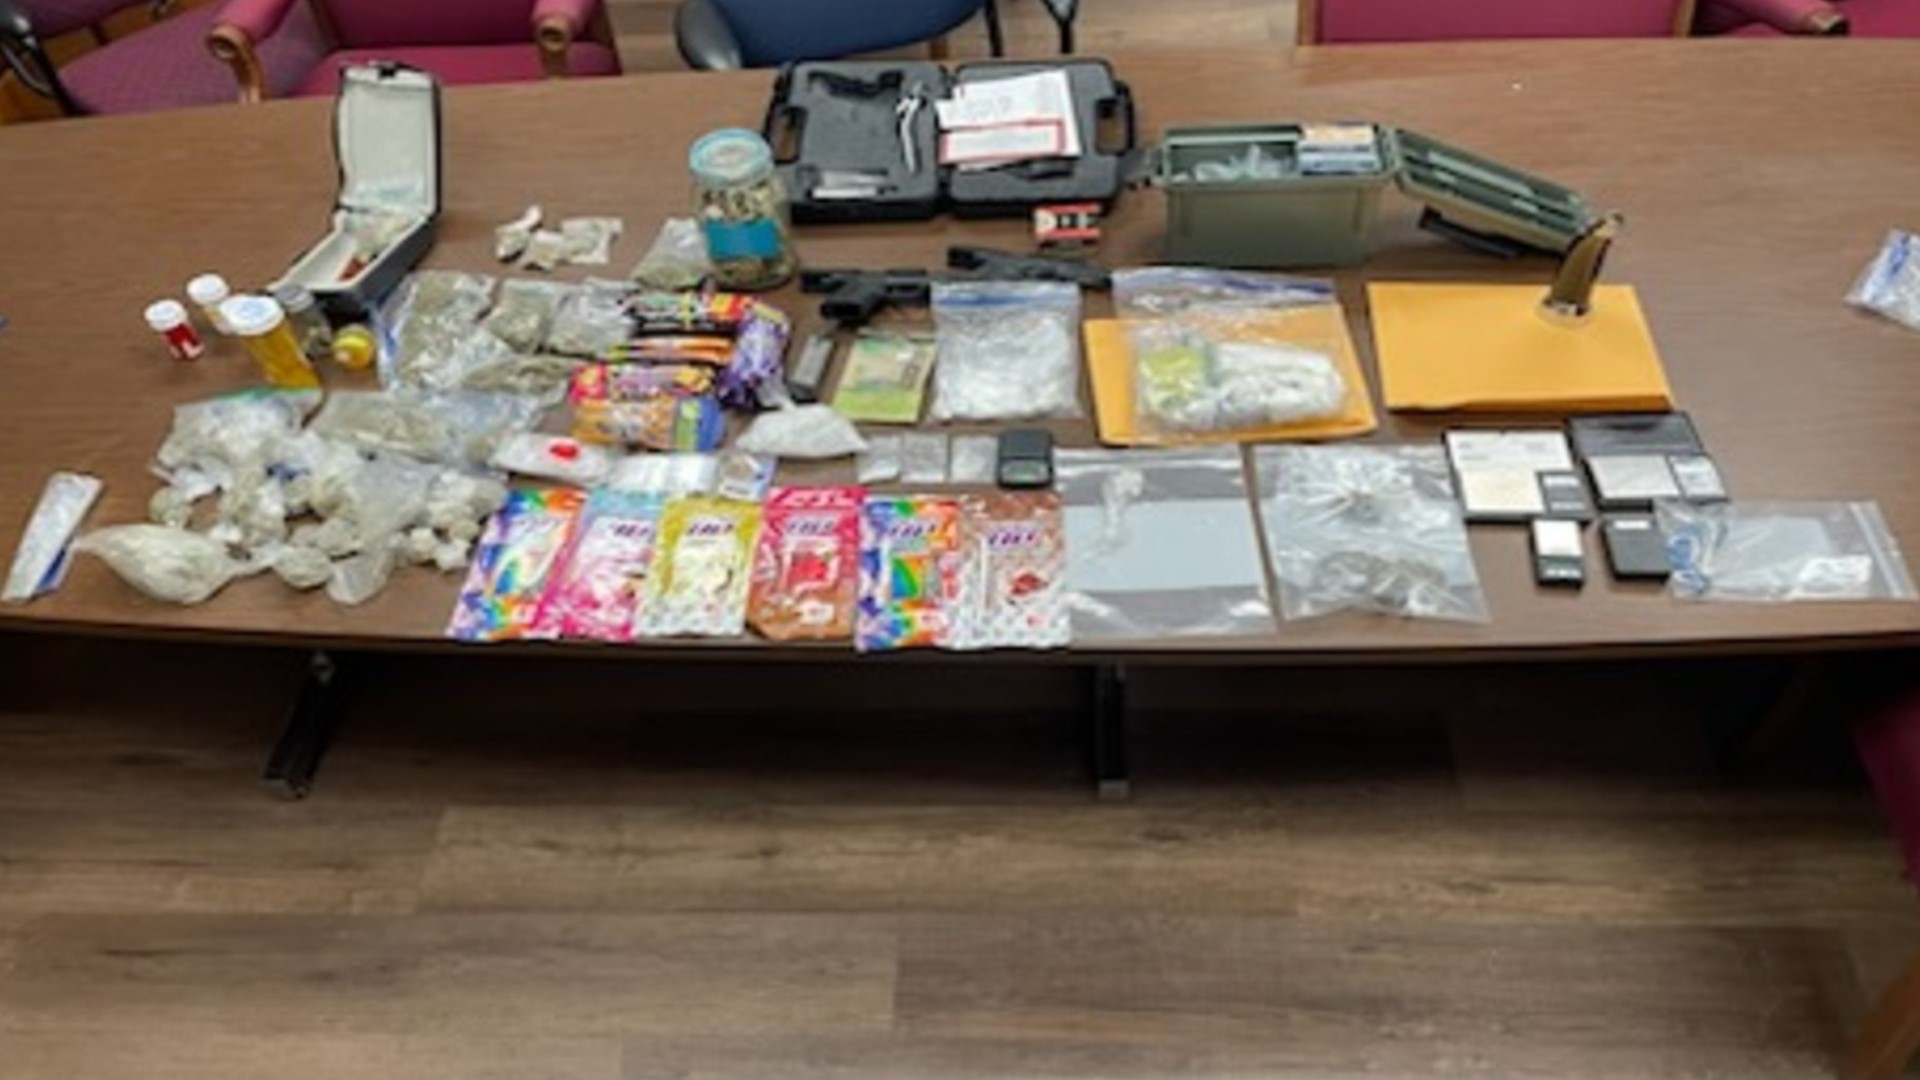 Detectives found suspected meth, suspected marijuana, suspected THC, suspected shrooms, suspected ecstasy, suspected fentanyl, prescription meds, pistols and more.